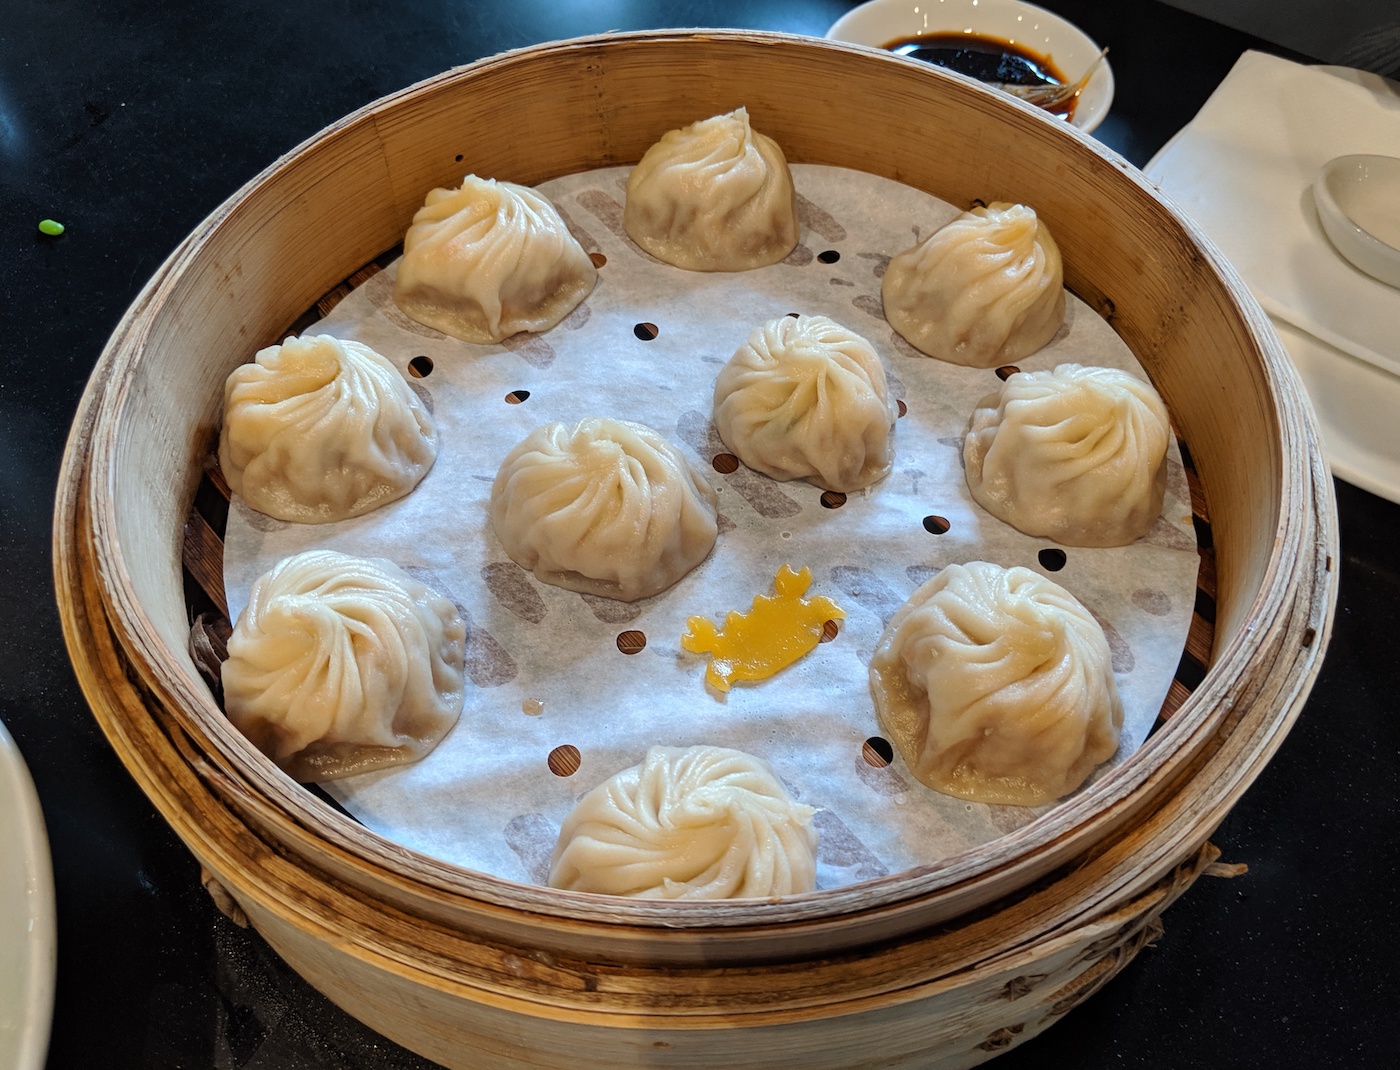 Best Dishes to Order at Din Tai Fung